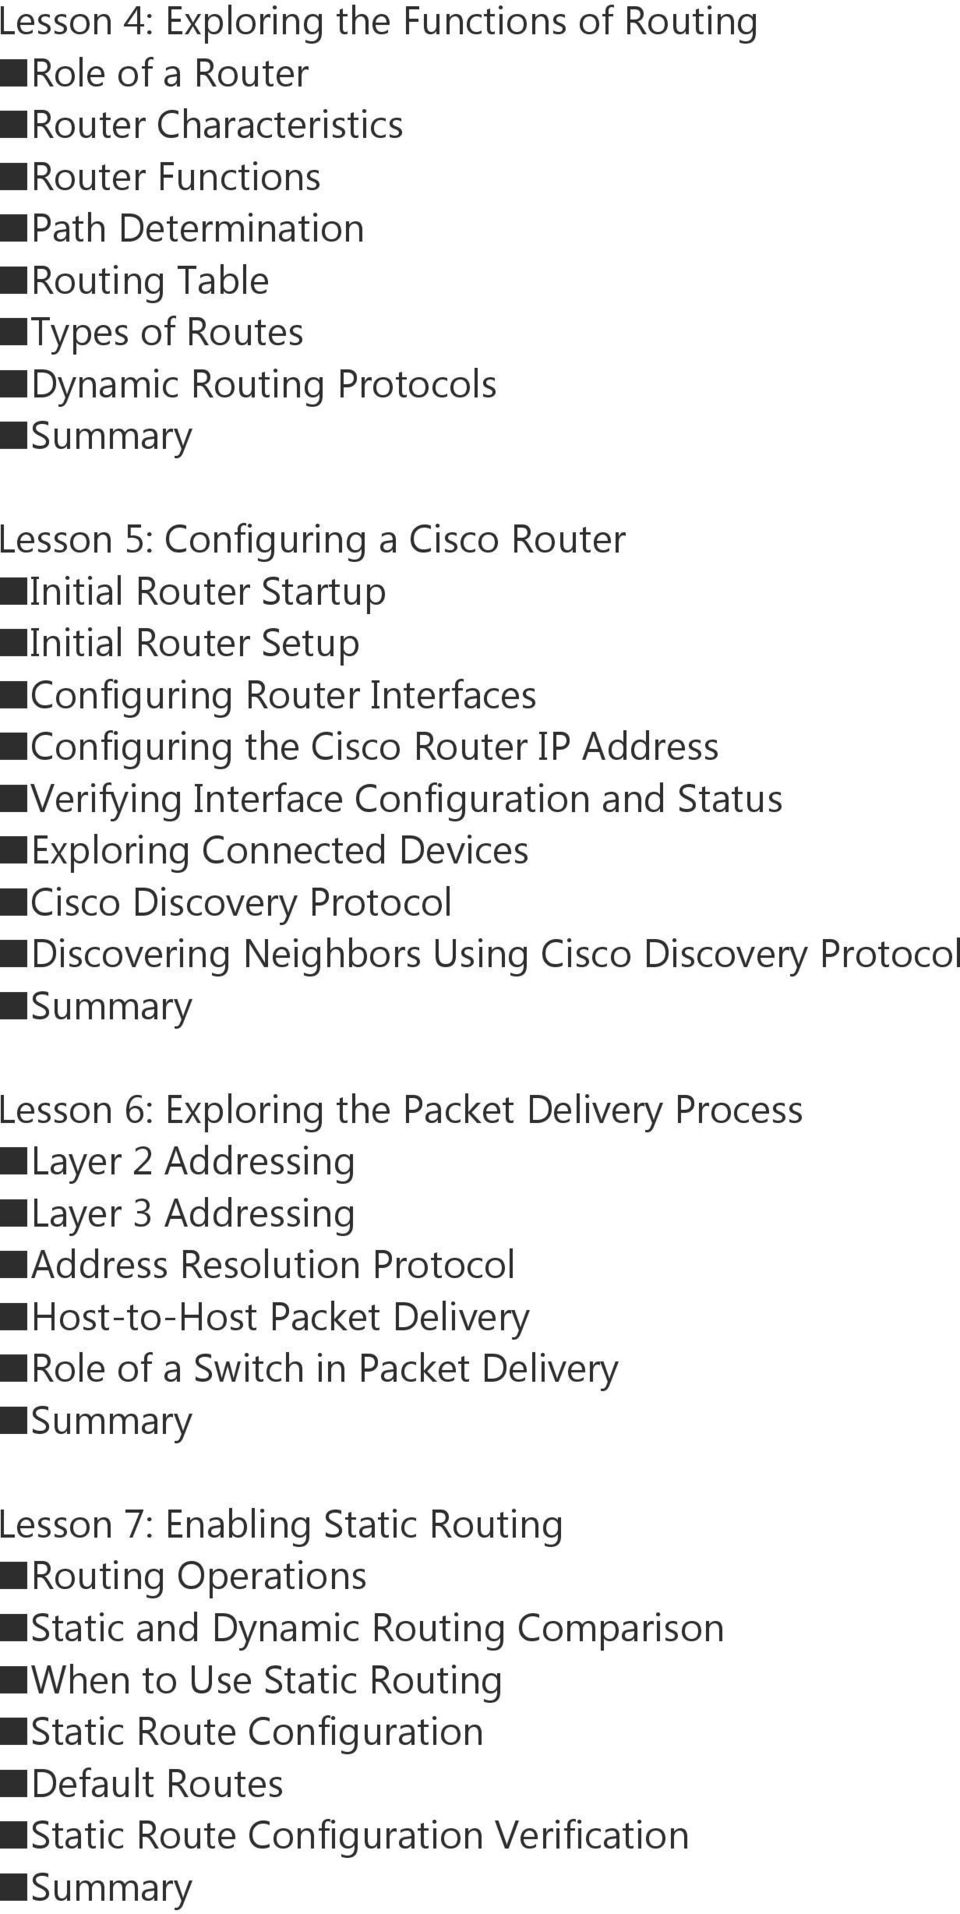 Devices Cisco Discovery Protocol Discovering Neighbors Using Cisco Discovery Protocol Lesson 6: Exploring the Packet Delivery Process Layer 2 Addressing Layer 3 Addressing Address Resolution Protocol